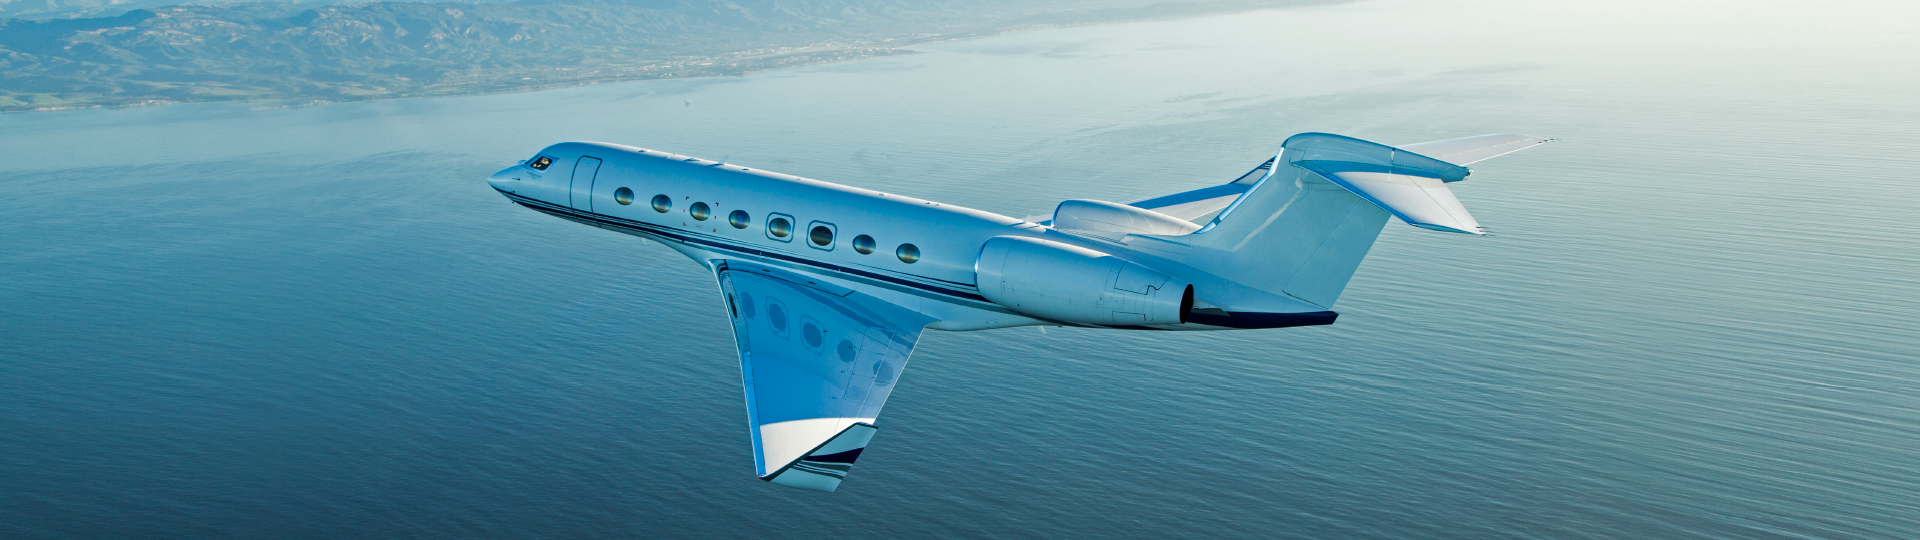 Gulfstream G450, business aircraft, flying over the Pacific Ocean off the west coast of the United States.